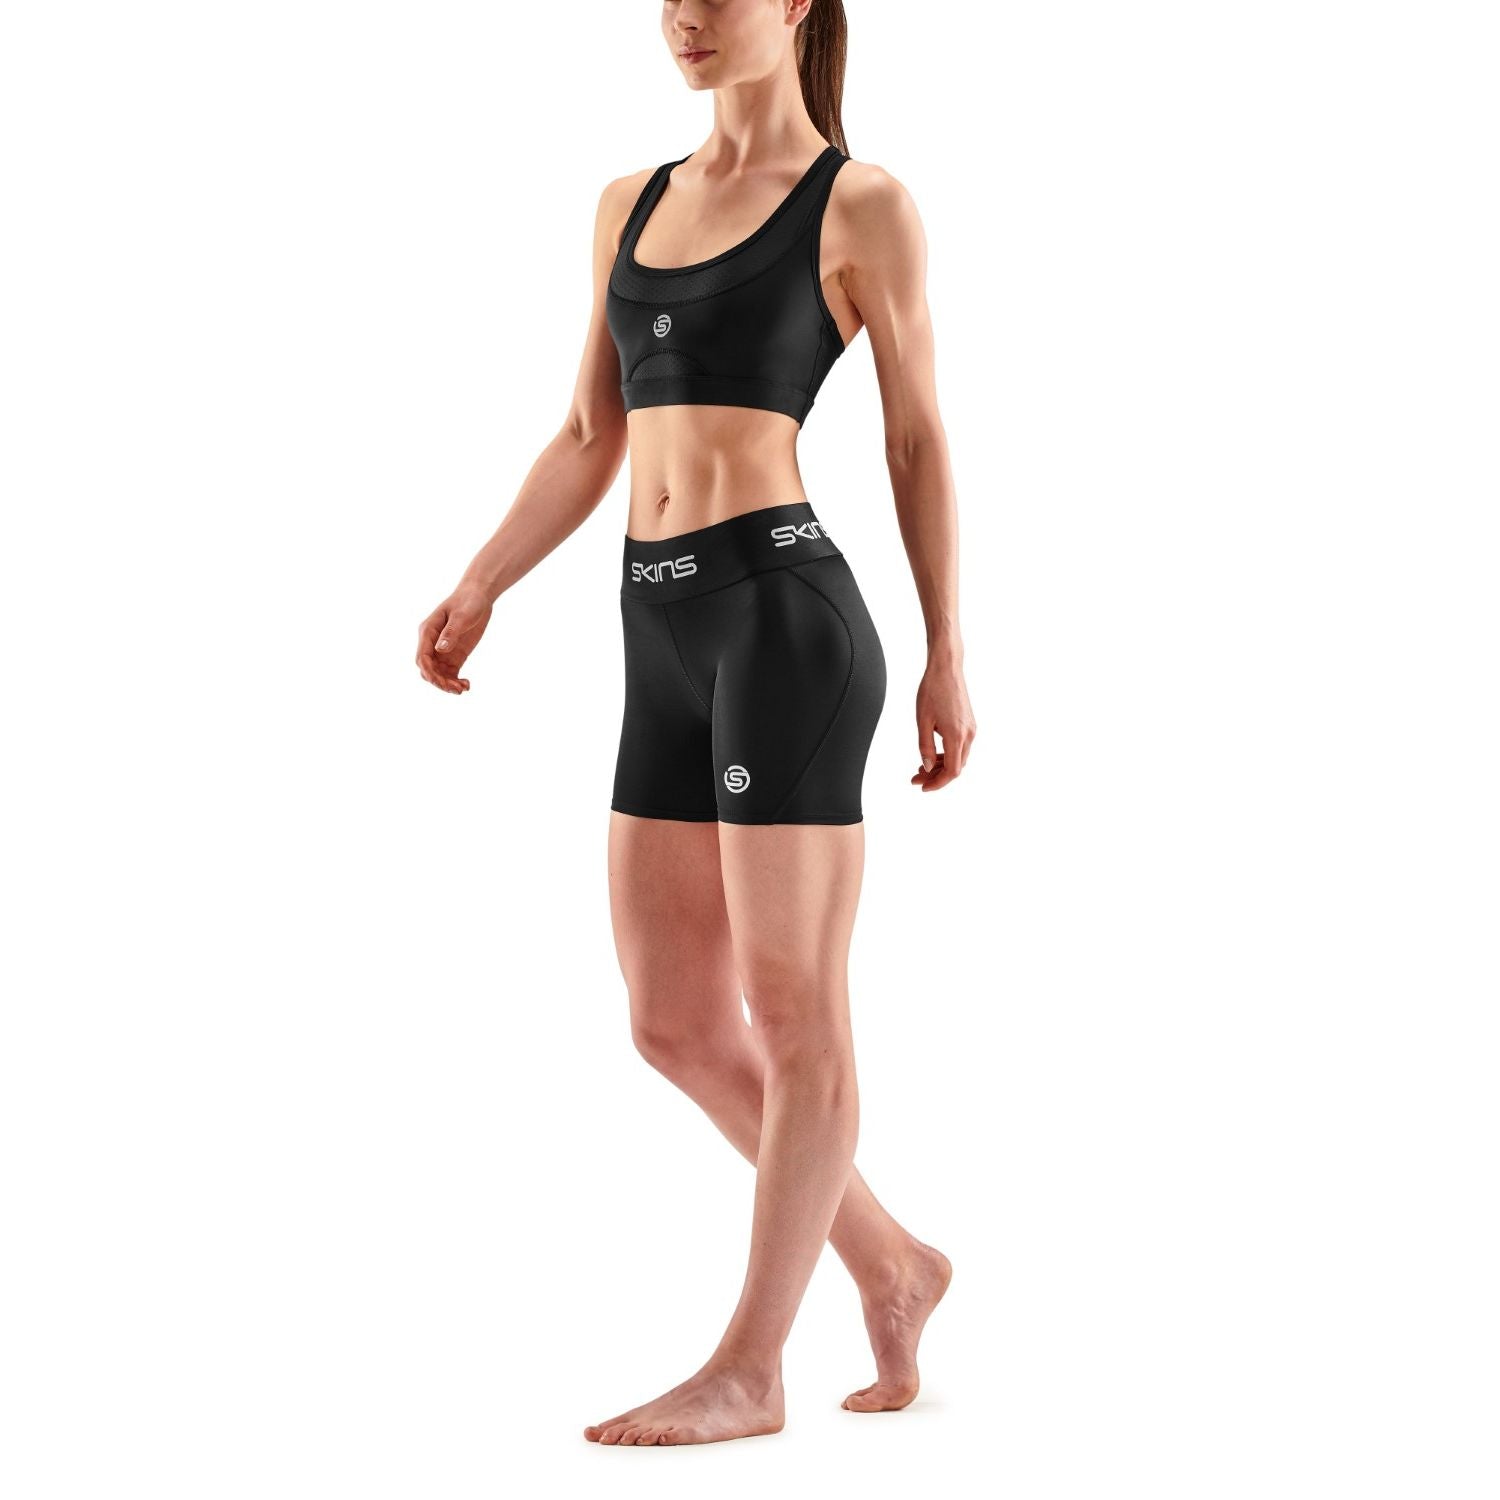 Skins Compression Running Clothes & Training Wear